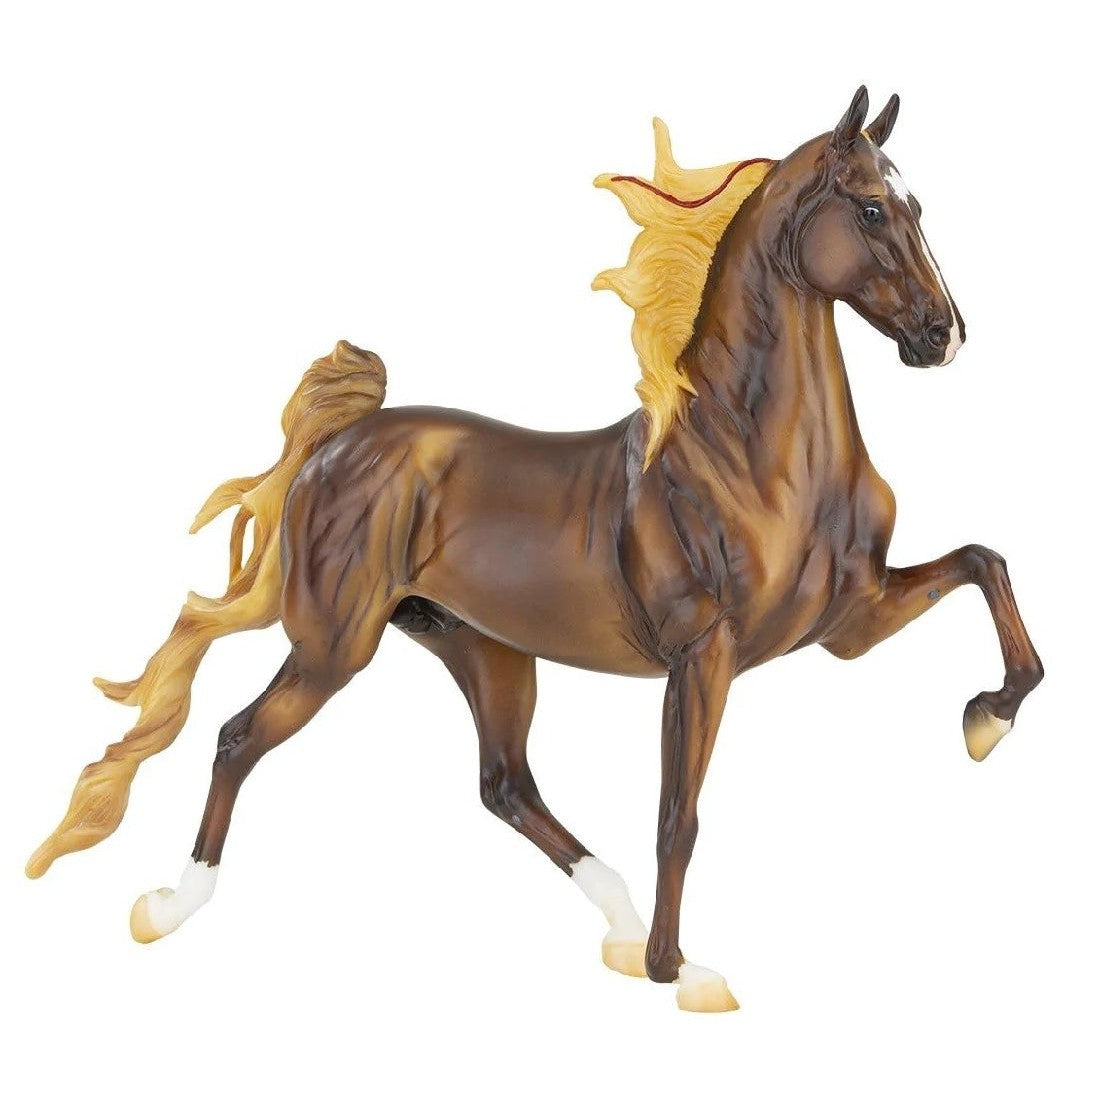 Breyer Horse Toy galloping with chestnut coat and blonde mane.